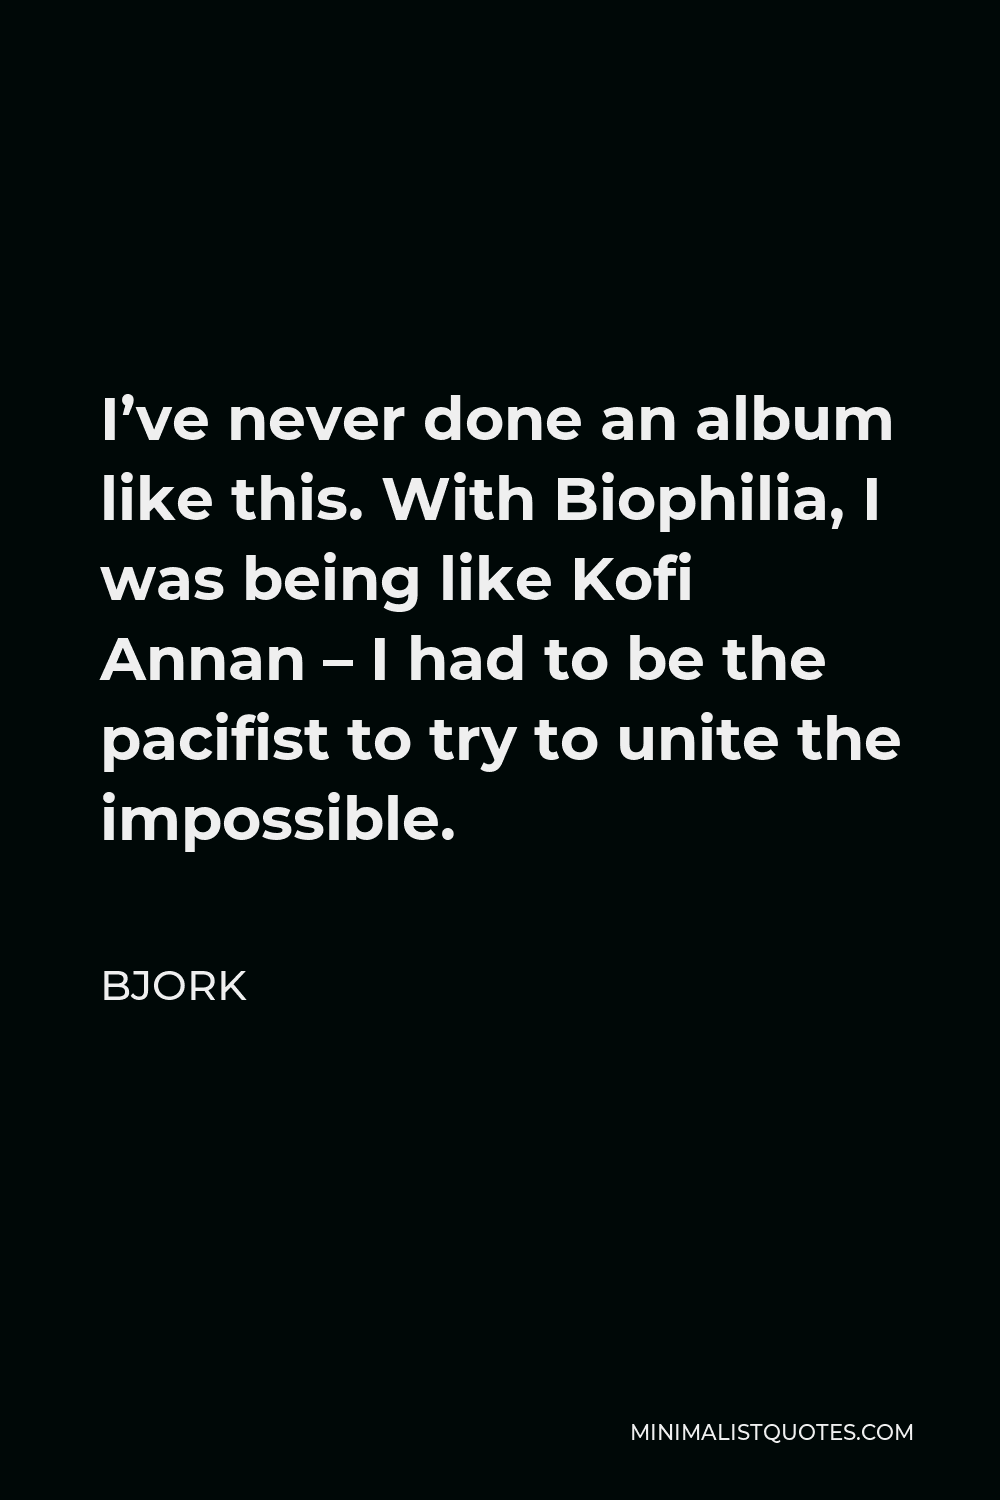 Bjork Quote - I’ve never done an album like this. With Biophilia, I was being like Kofi Annan – I had to be the pacifist to try to unite the impossible.